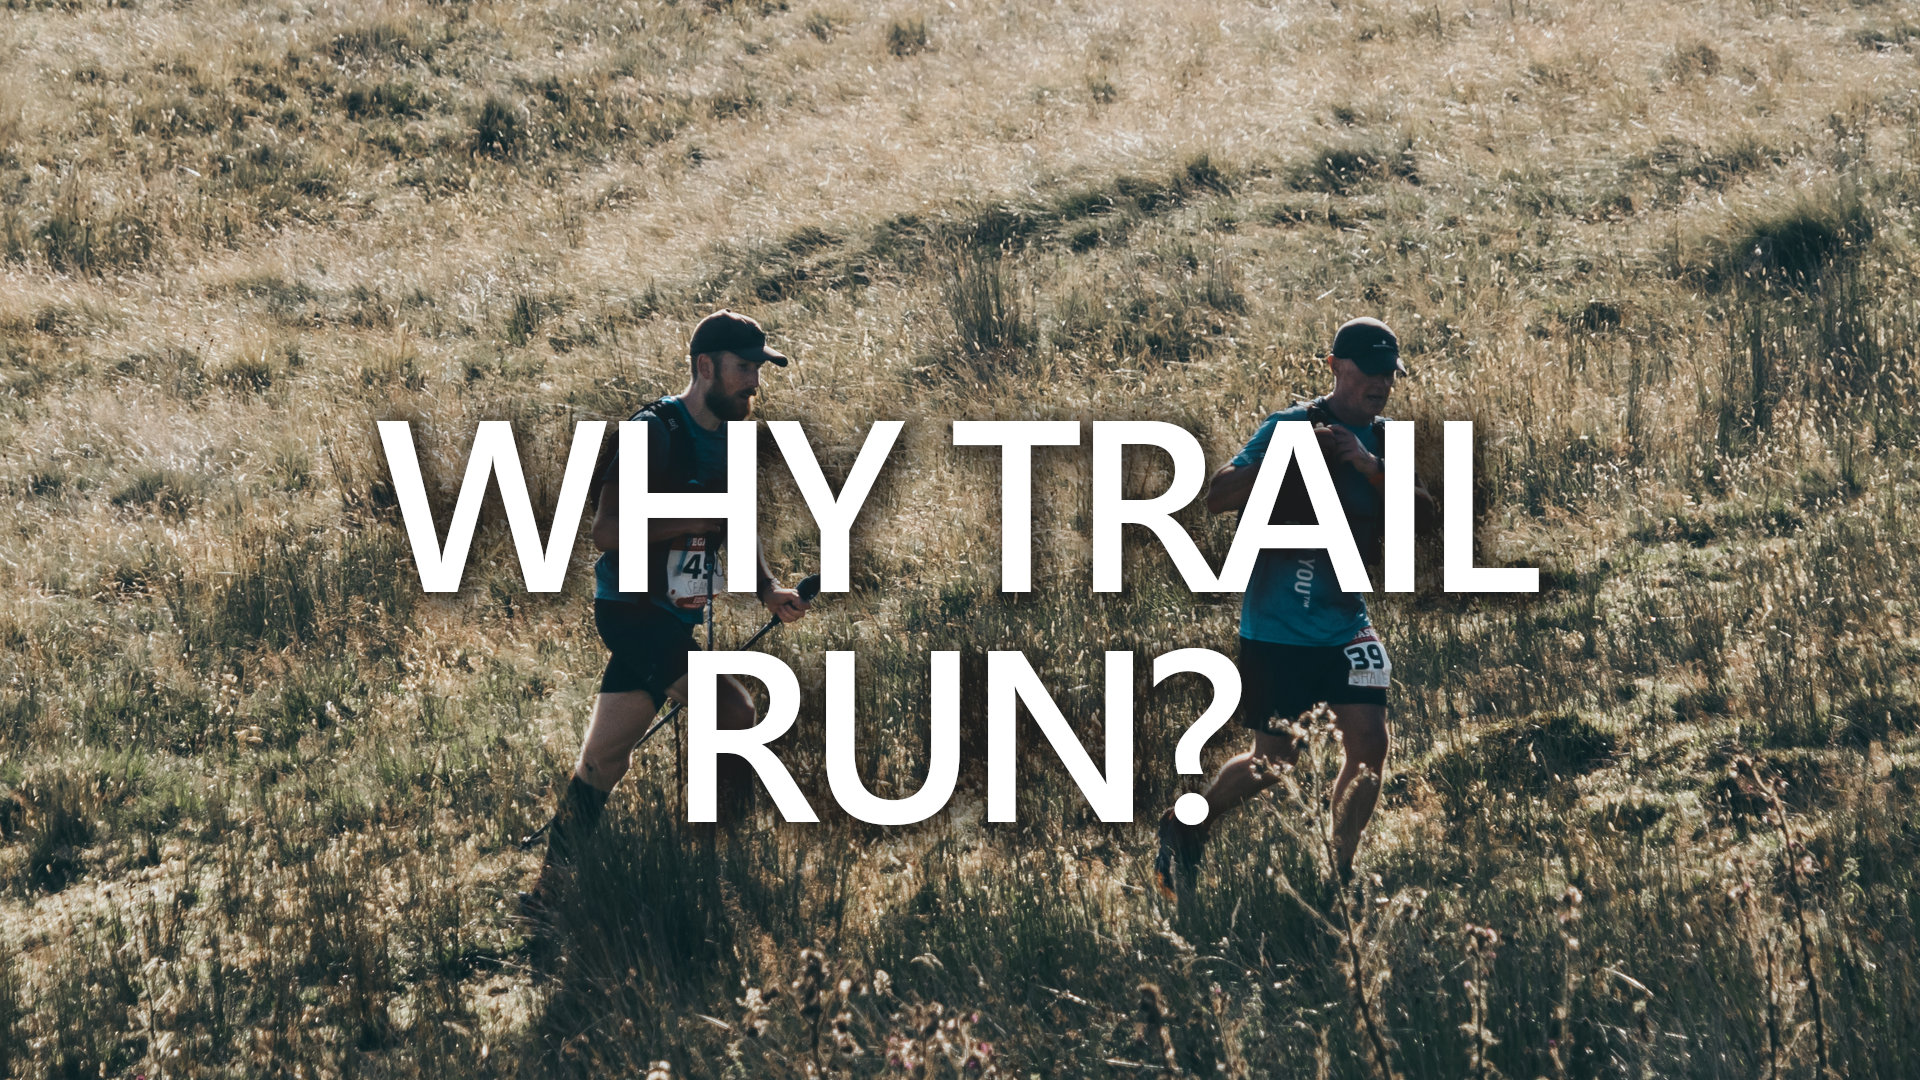 why trail run - image of two ultra runners moving quickly across a grassy, hilly landscape